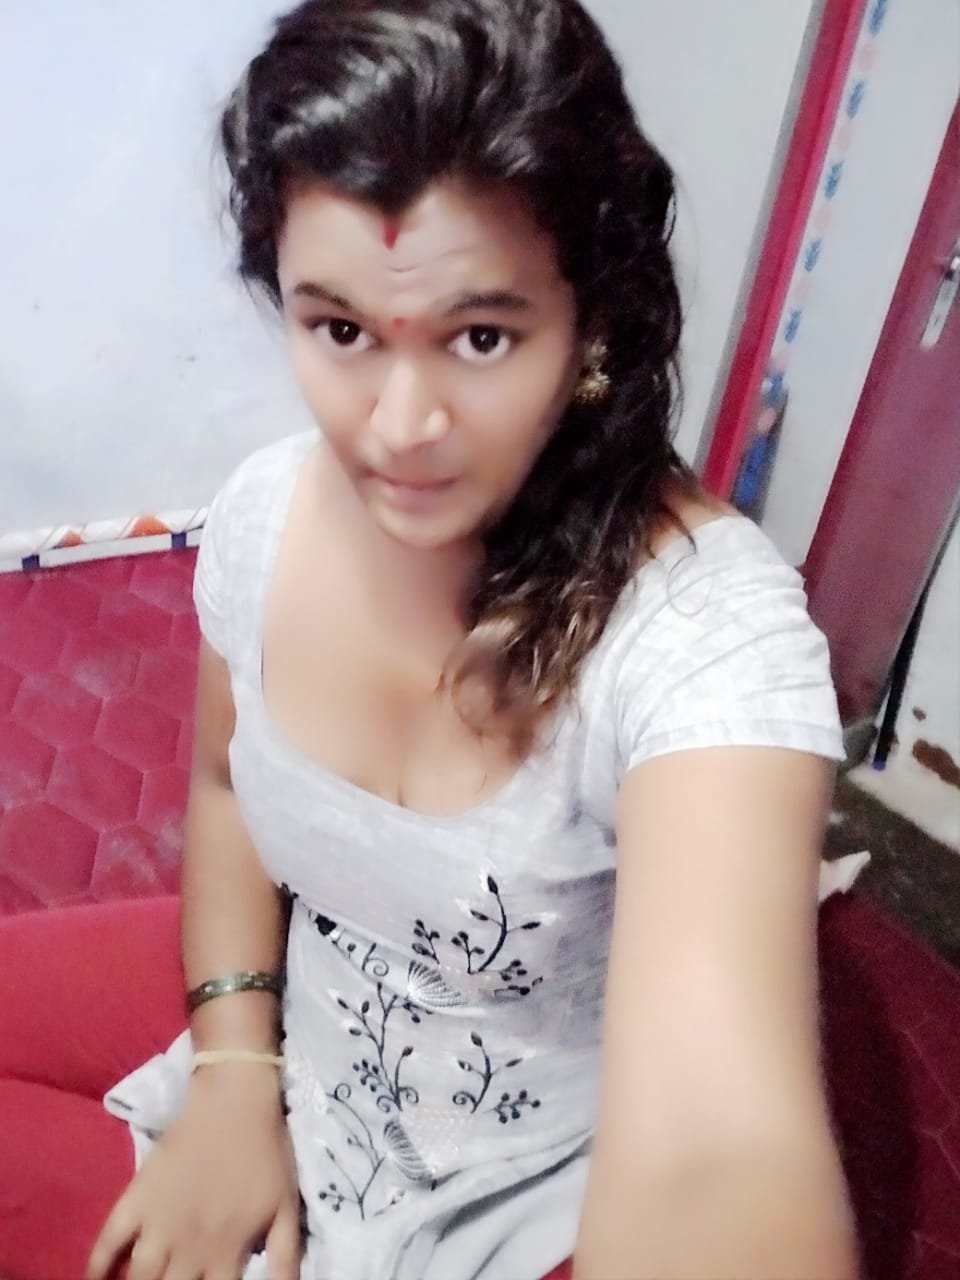 Black Shemale Sex Chat - Dhivya Shemale, Indian Transsexual escort in Bangalore